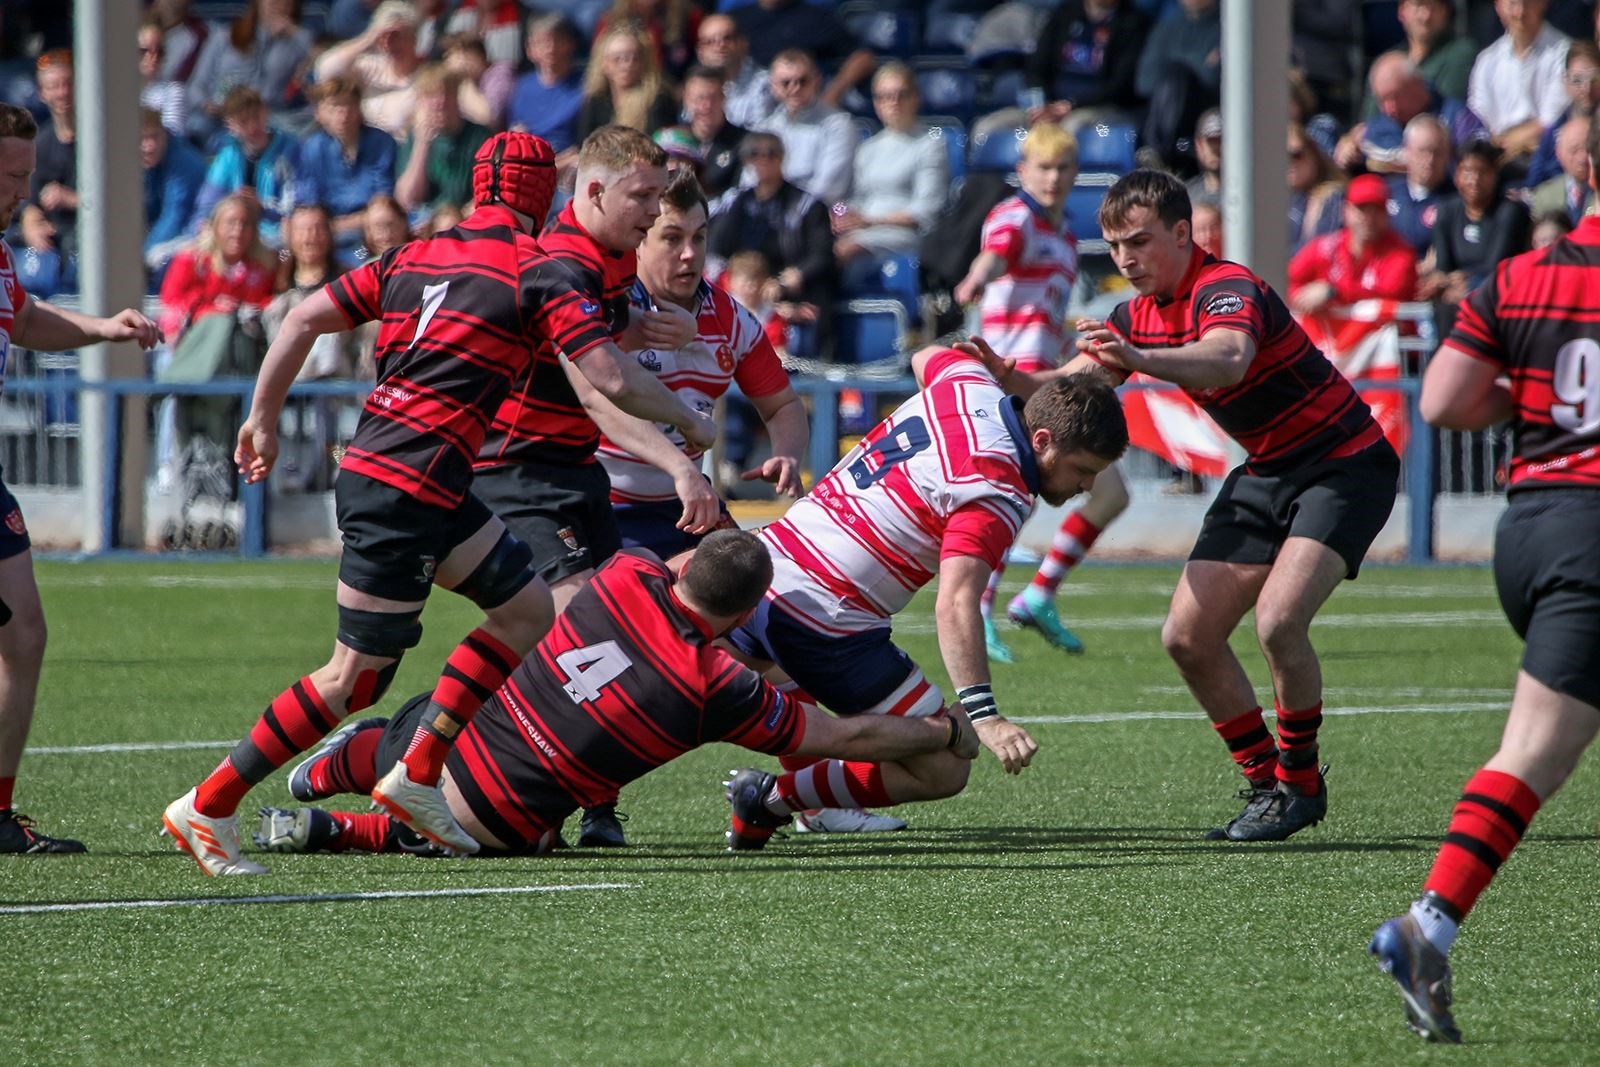 Neil Alexander tackled, Cameron Hughes coming in to support. Picture: John MacGregor